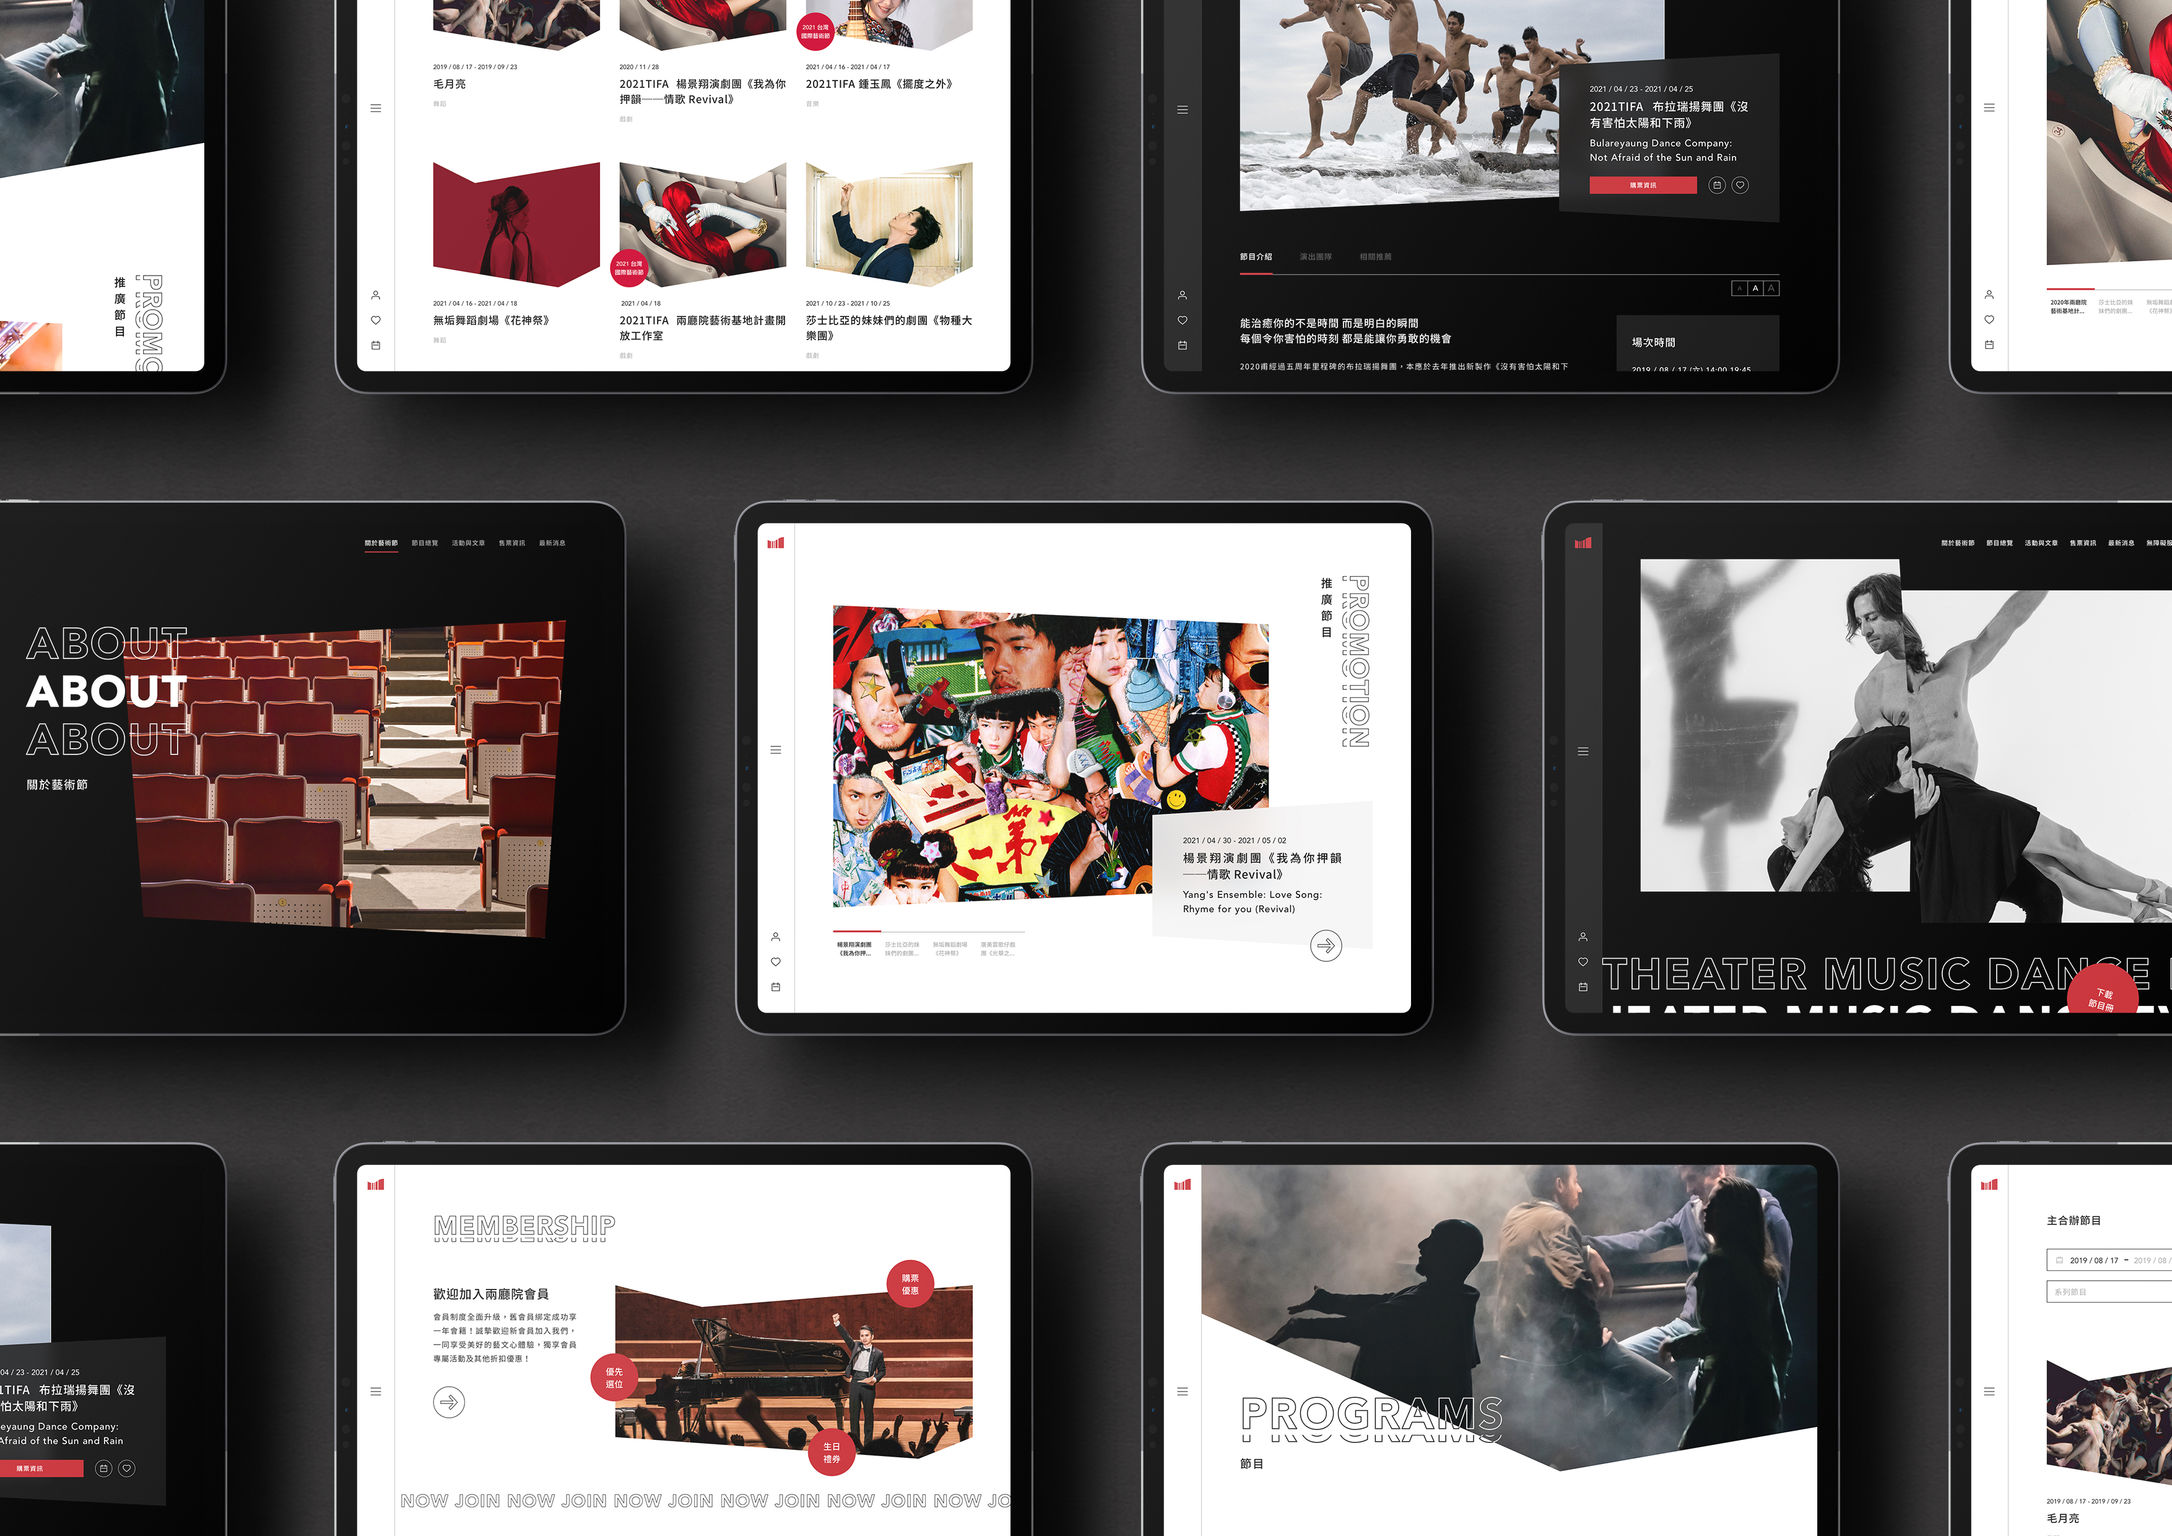 Website of National Theater & Concert Hall, Taiwan